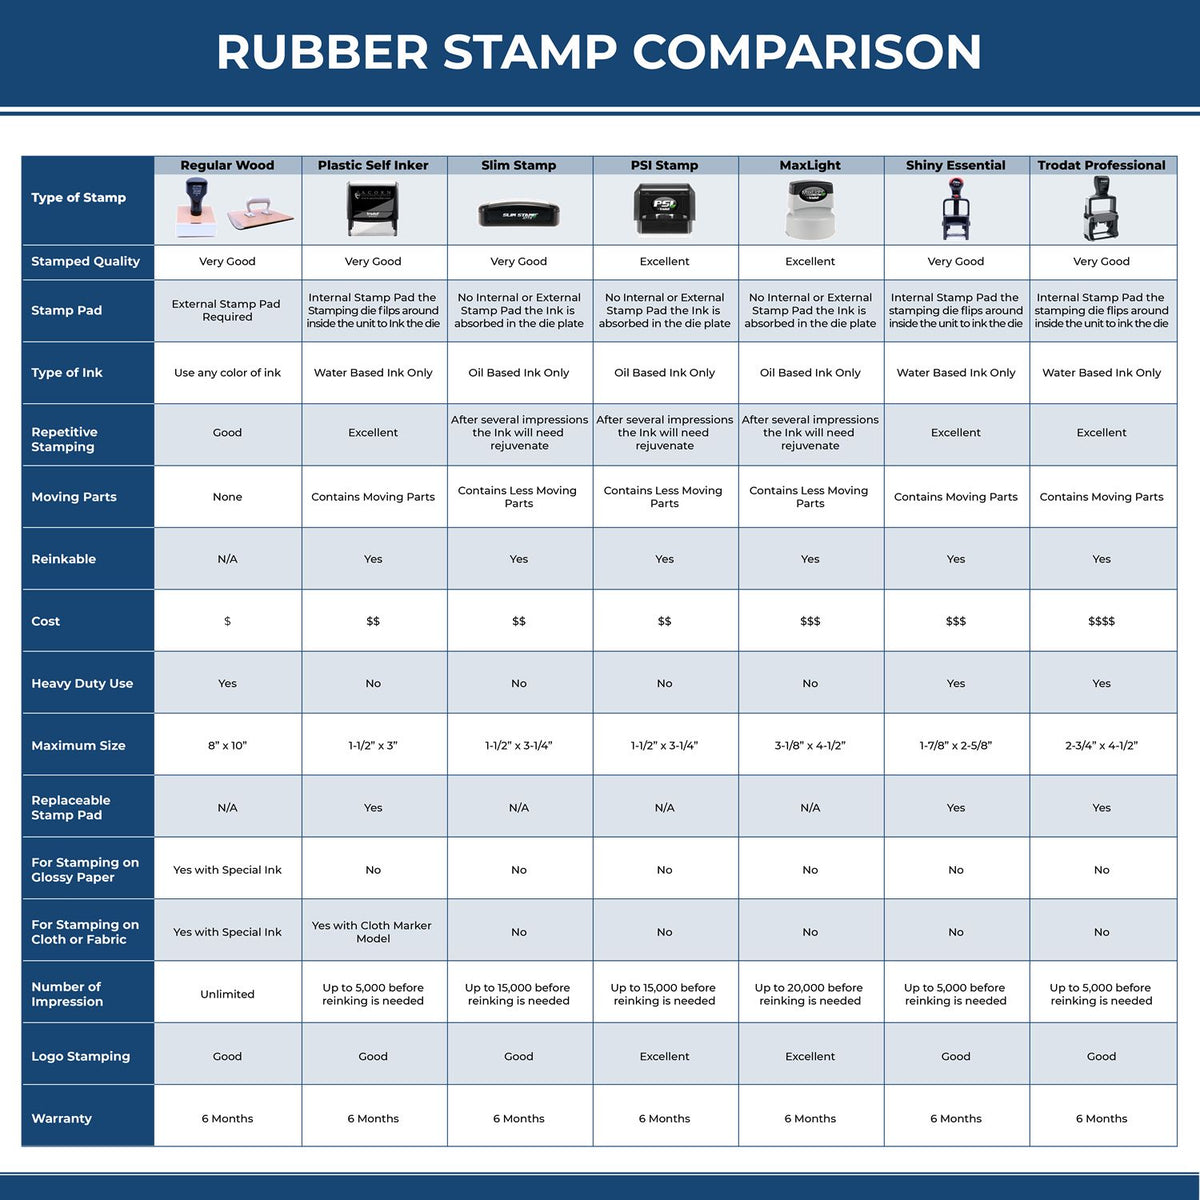 Large Self-Inking Office Copy Stamp 4949S Rubber Stamp Comparison